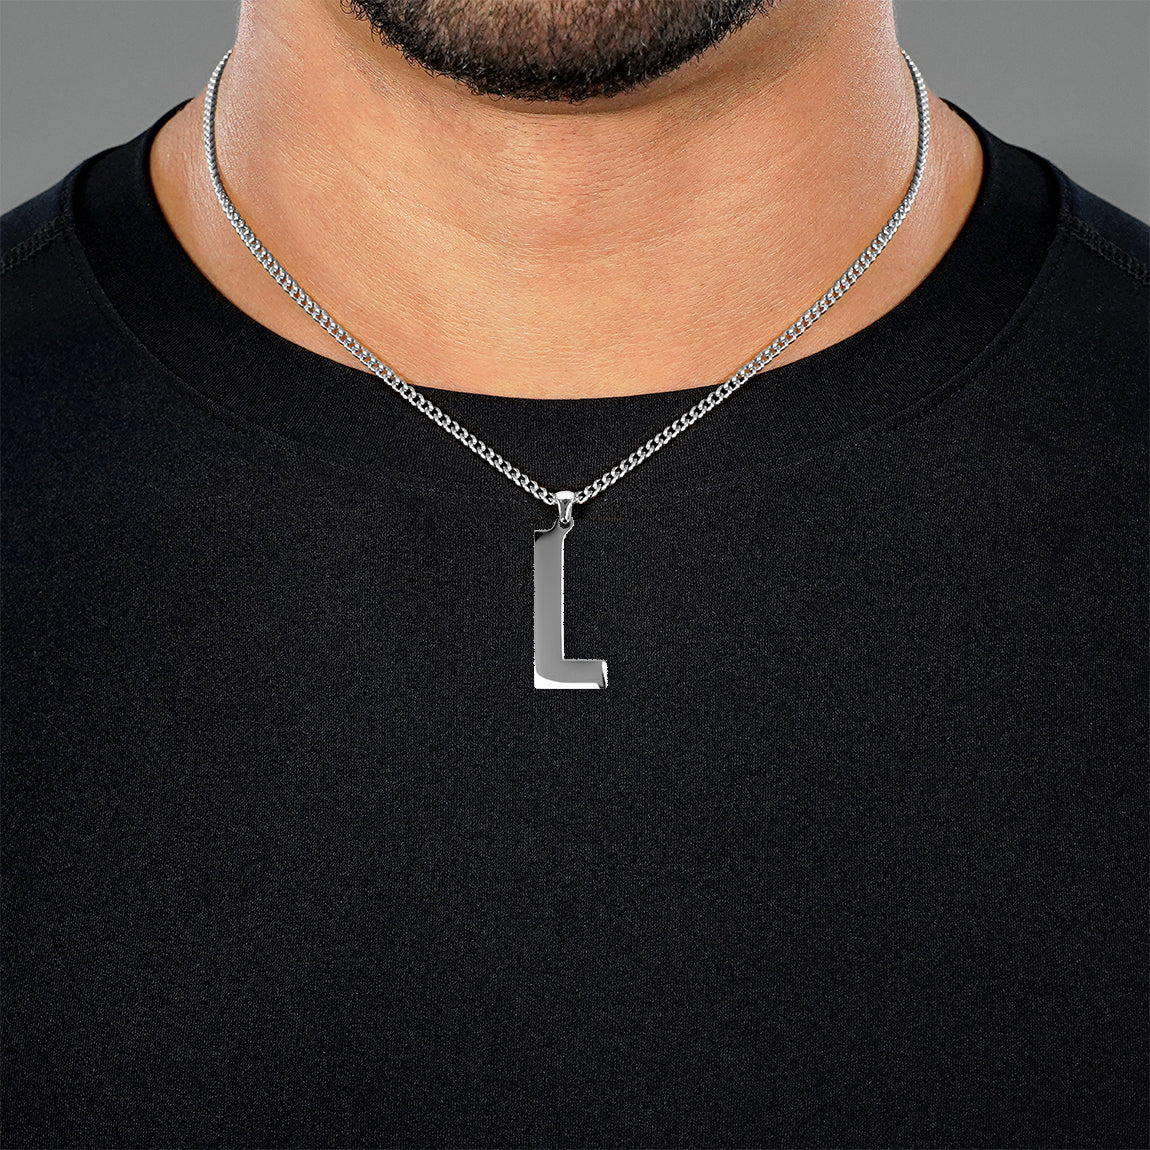 L Letter Pendant with Chain Necklace - Stainless Steel